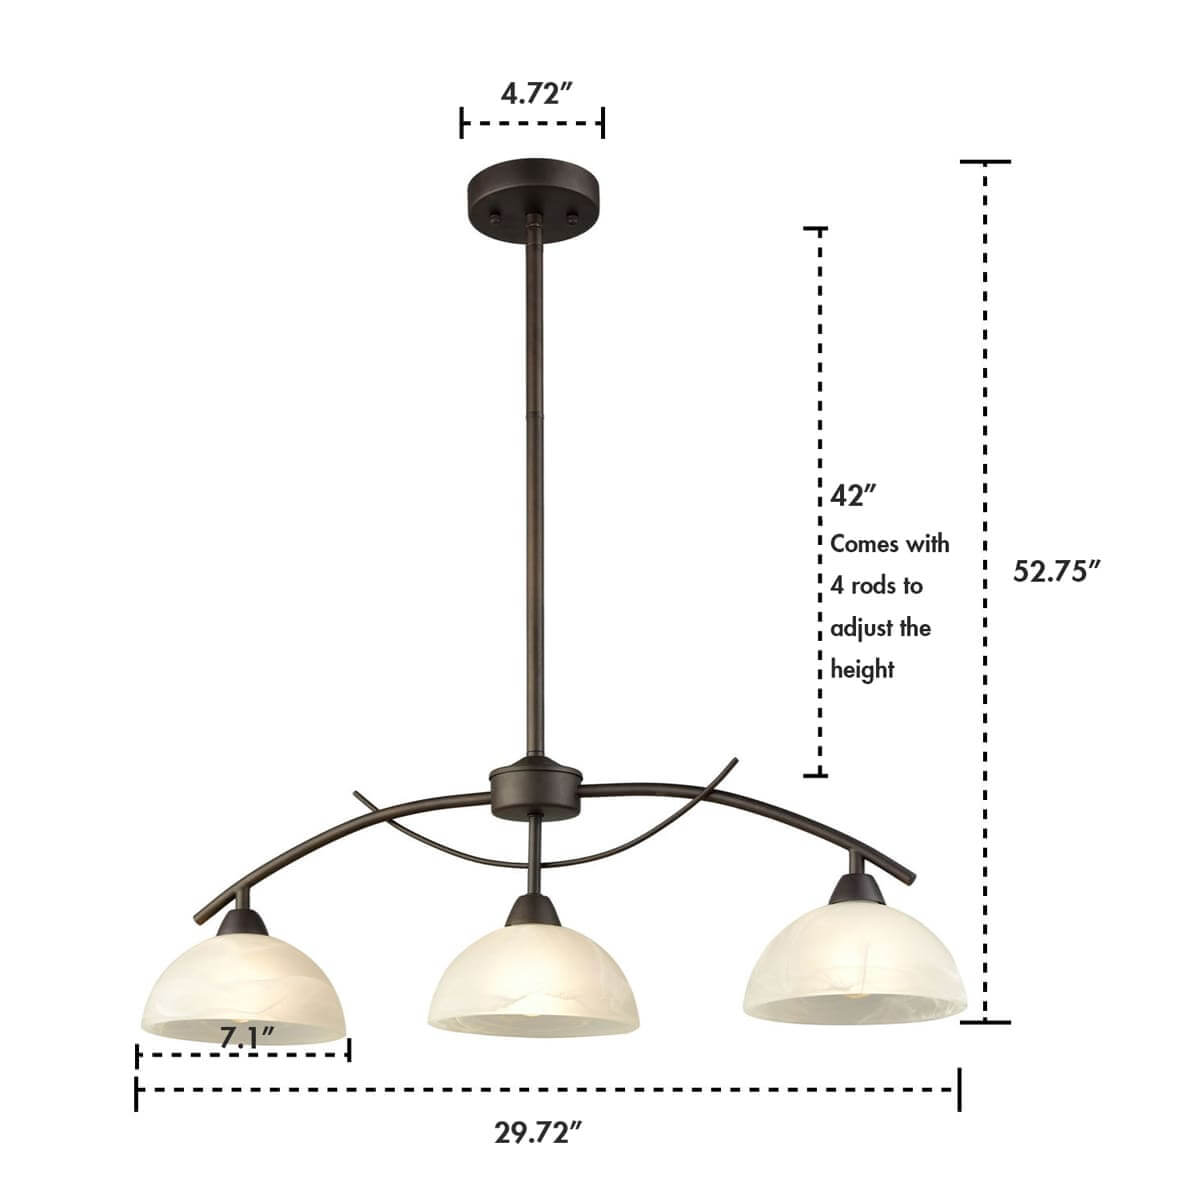 Retro Kitchen Pendant Lighting Industrial Small Hanging Light With